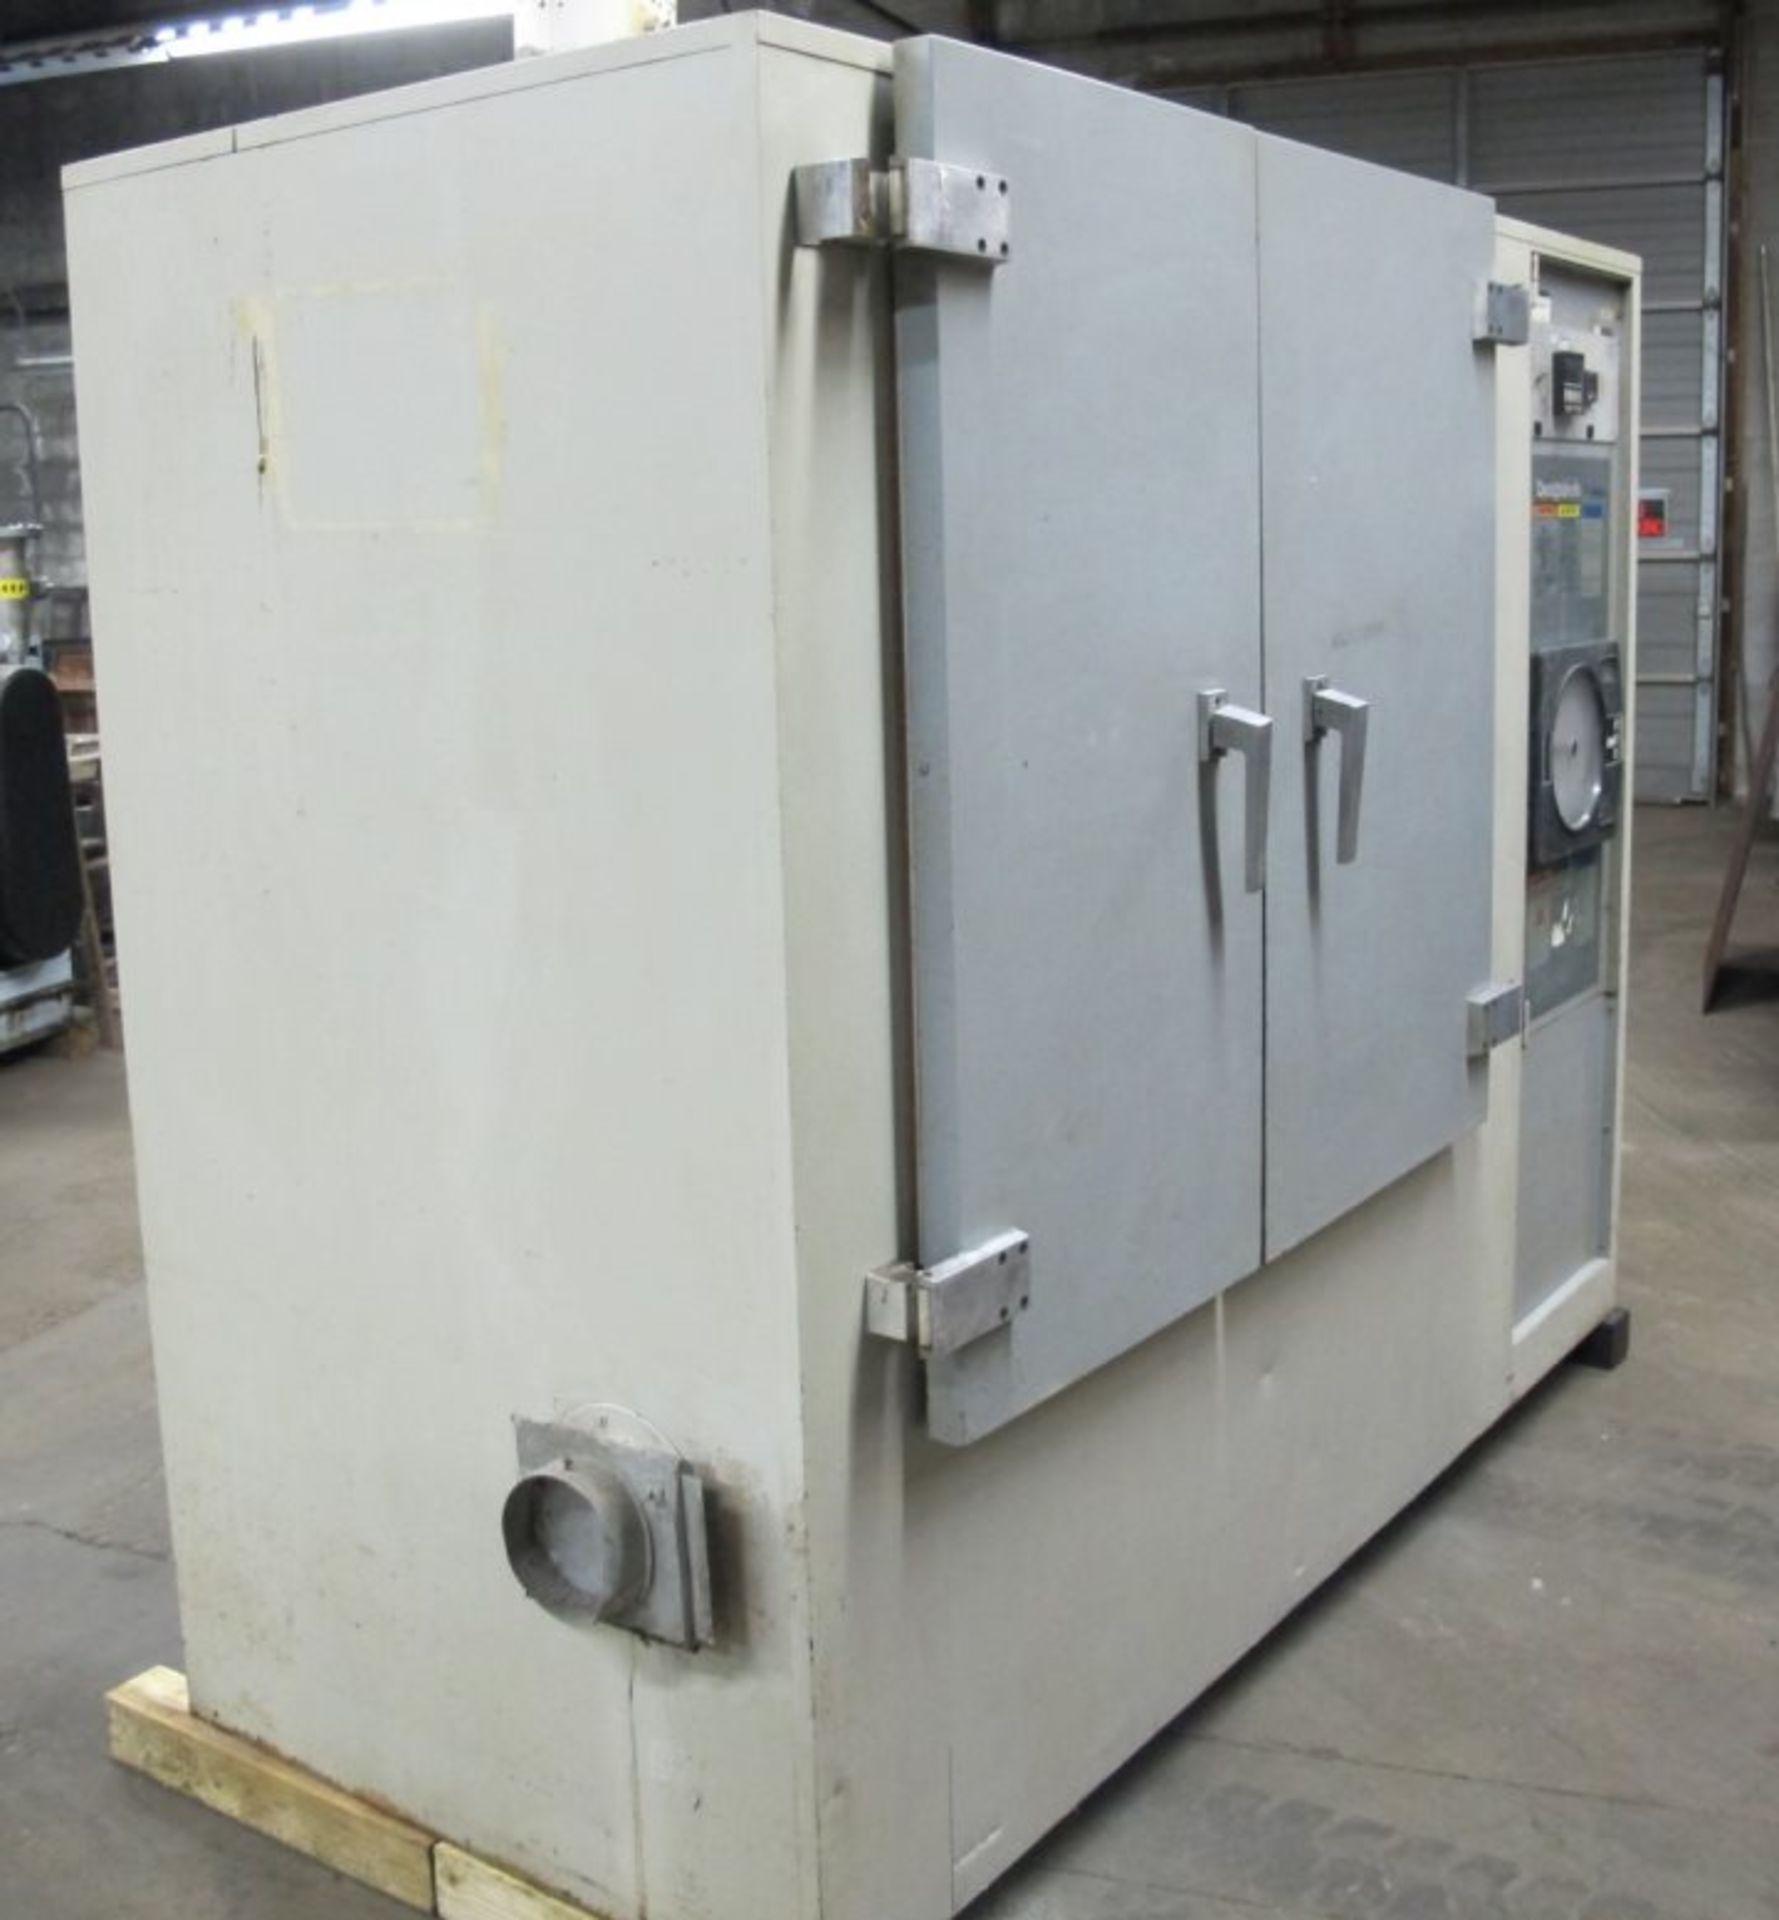 DESPATCH CABINET OVEN - Image 5 of 5